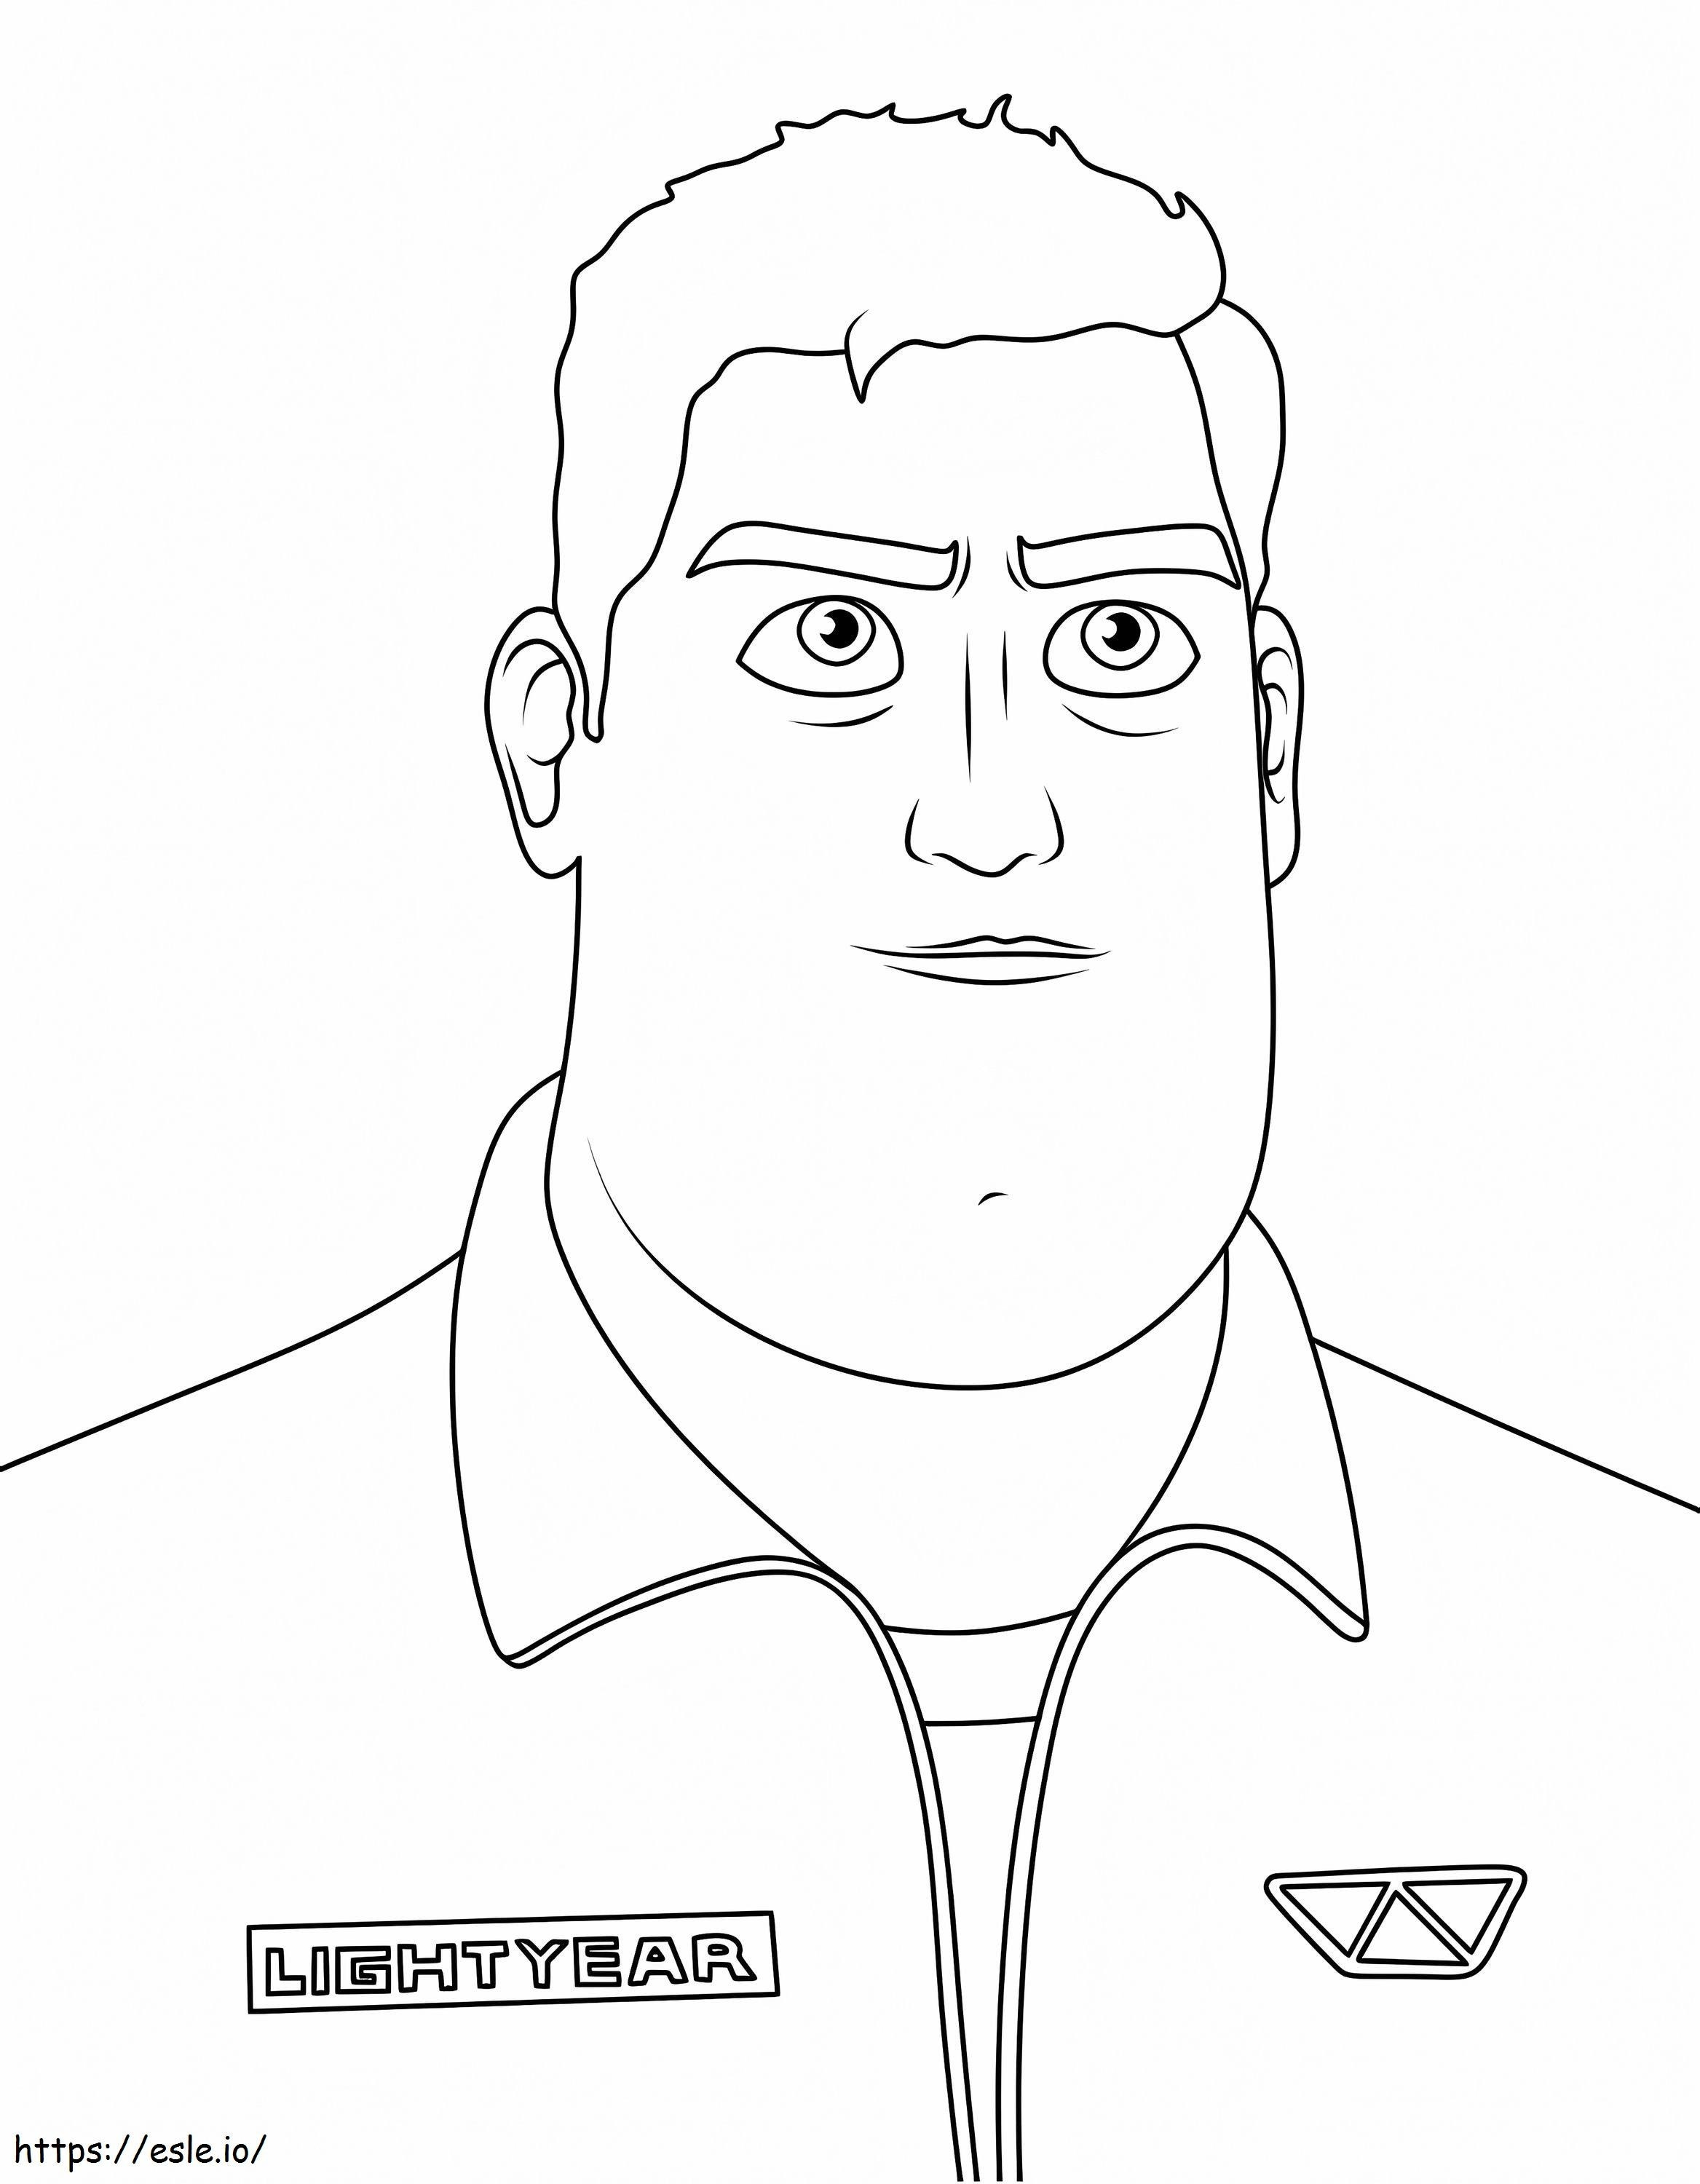 Buzz Lightyear From Lightyear coloring page